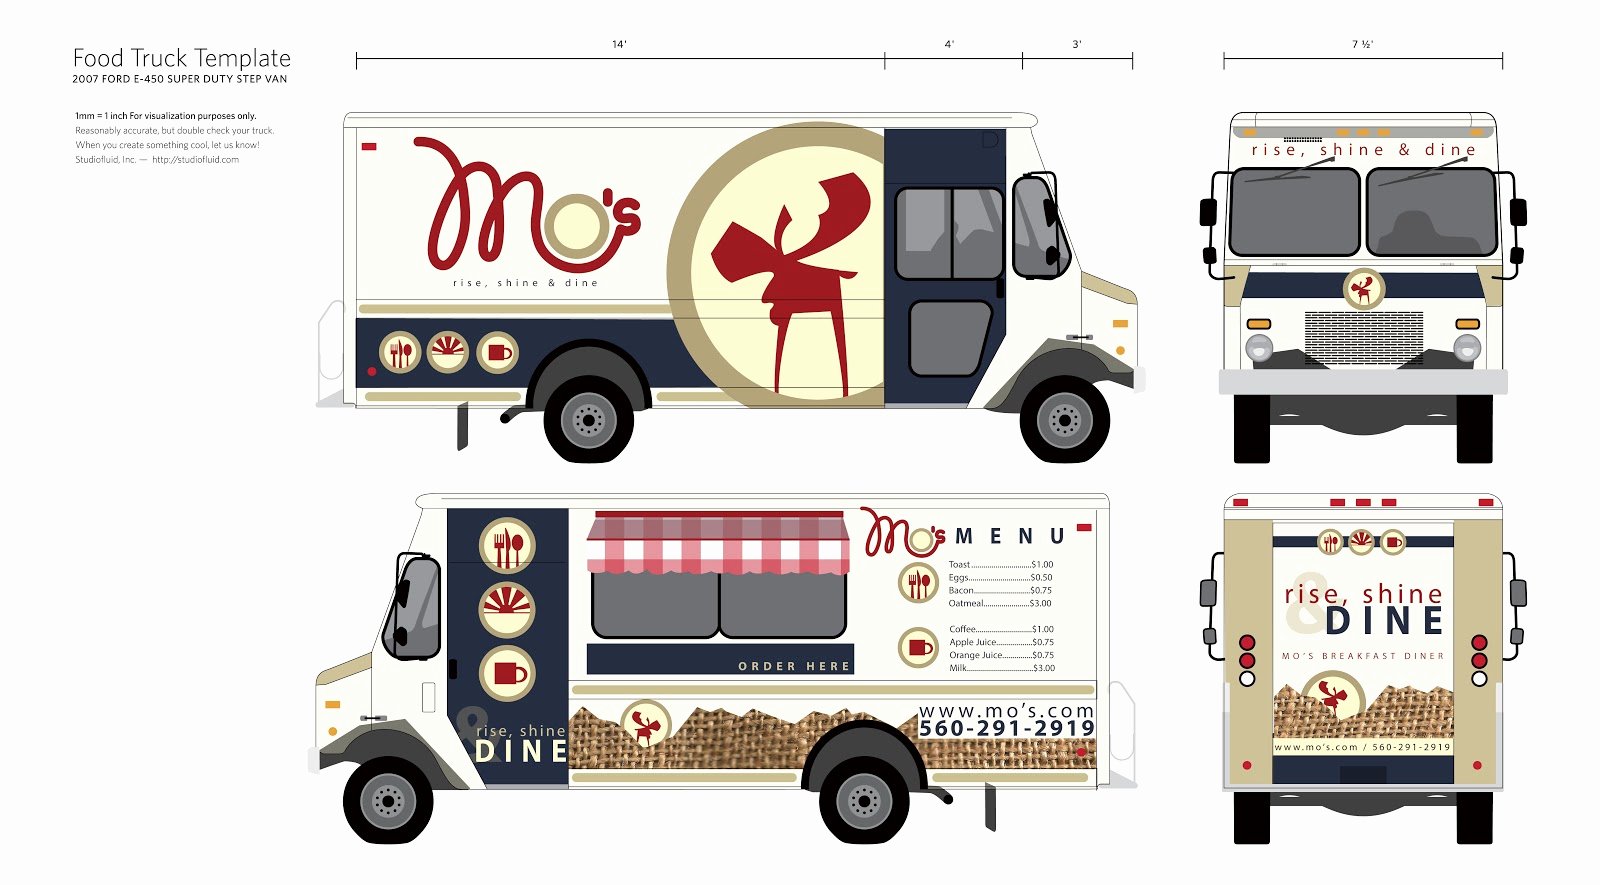 Food Truck Layout Template Lovely 8 Design Your Own Food Truck Designyourown Food